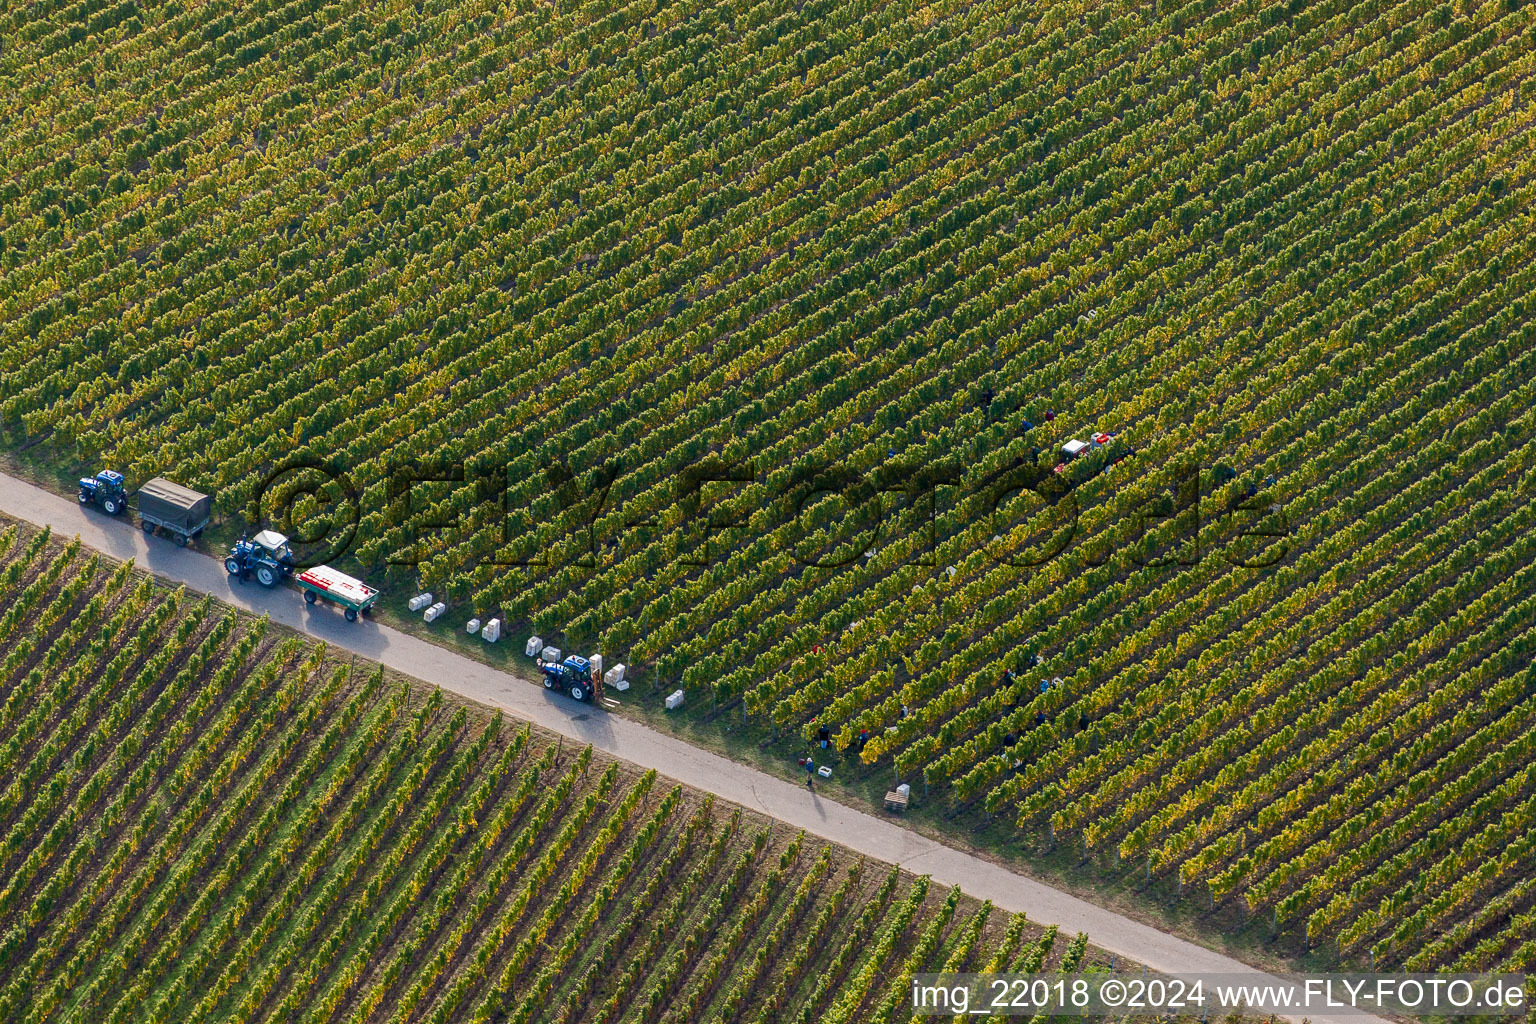 Workiing with harvesters on wie yaard rows in Ruppertsberg in the state Rhineland-Palatinate, Germany